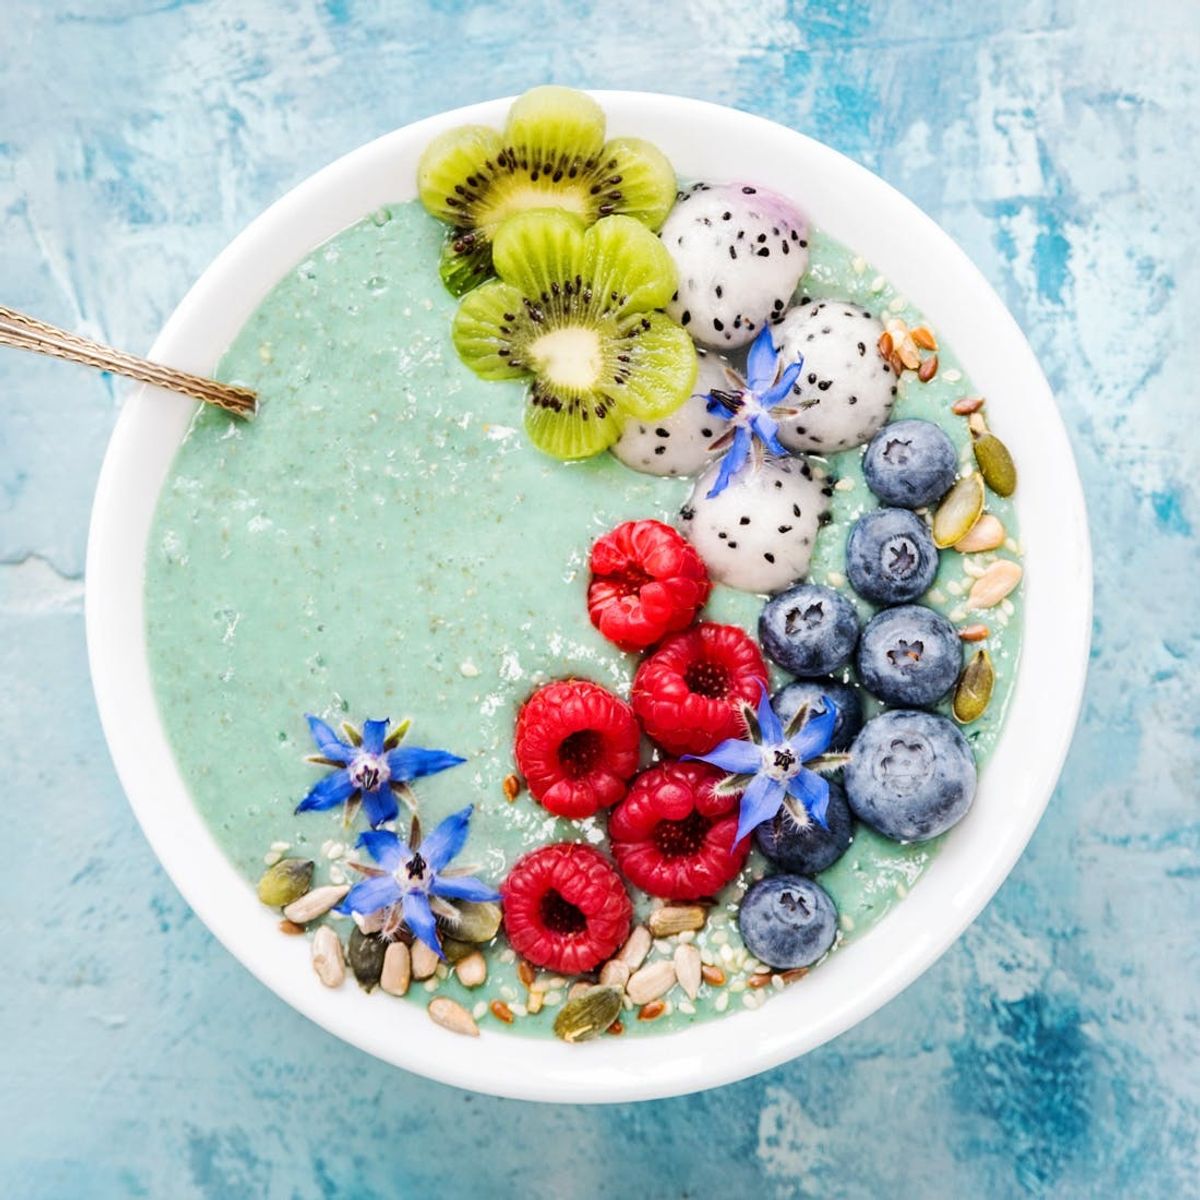 This Mermaid Smoothie Bowl Recipe Is Almost Too Pretty to Eat